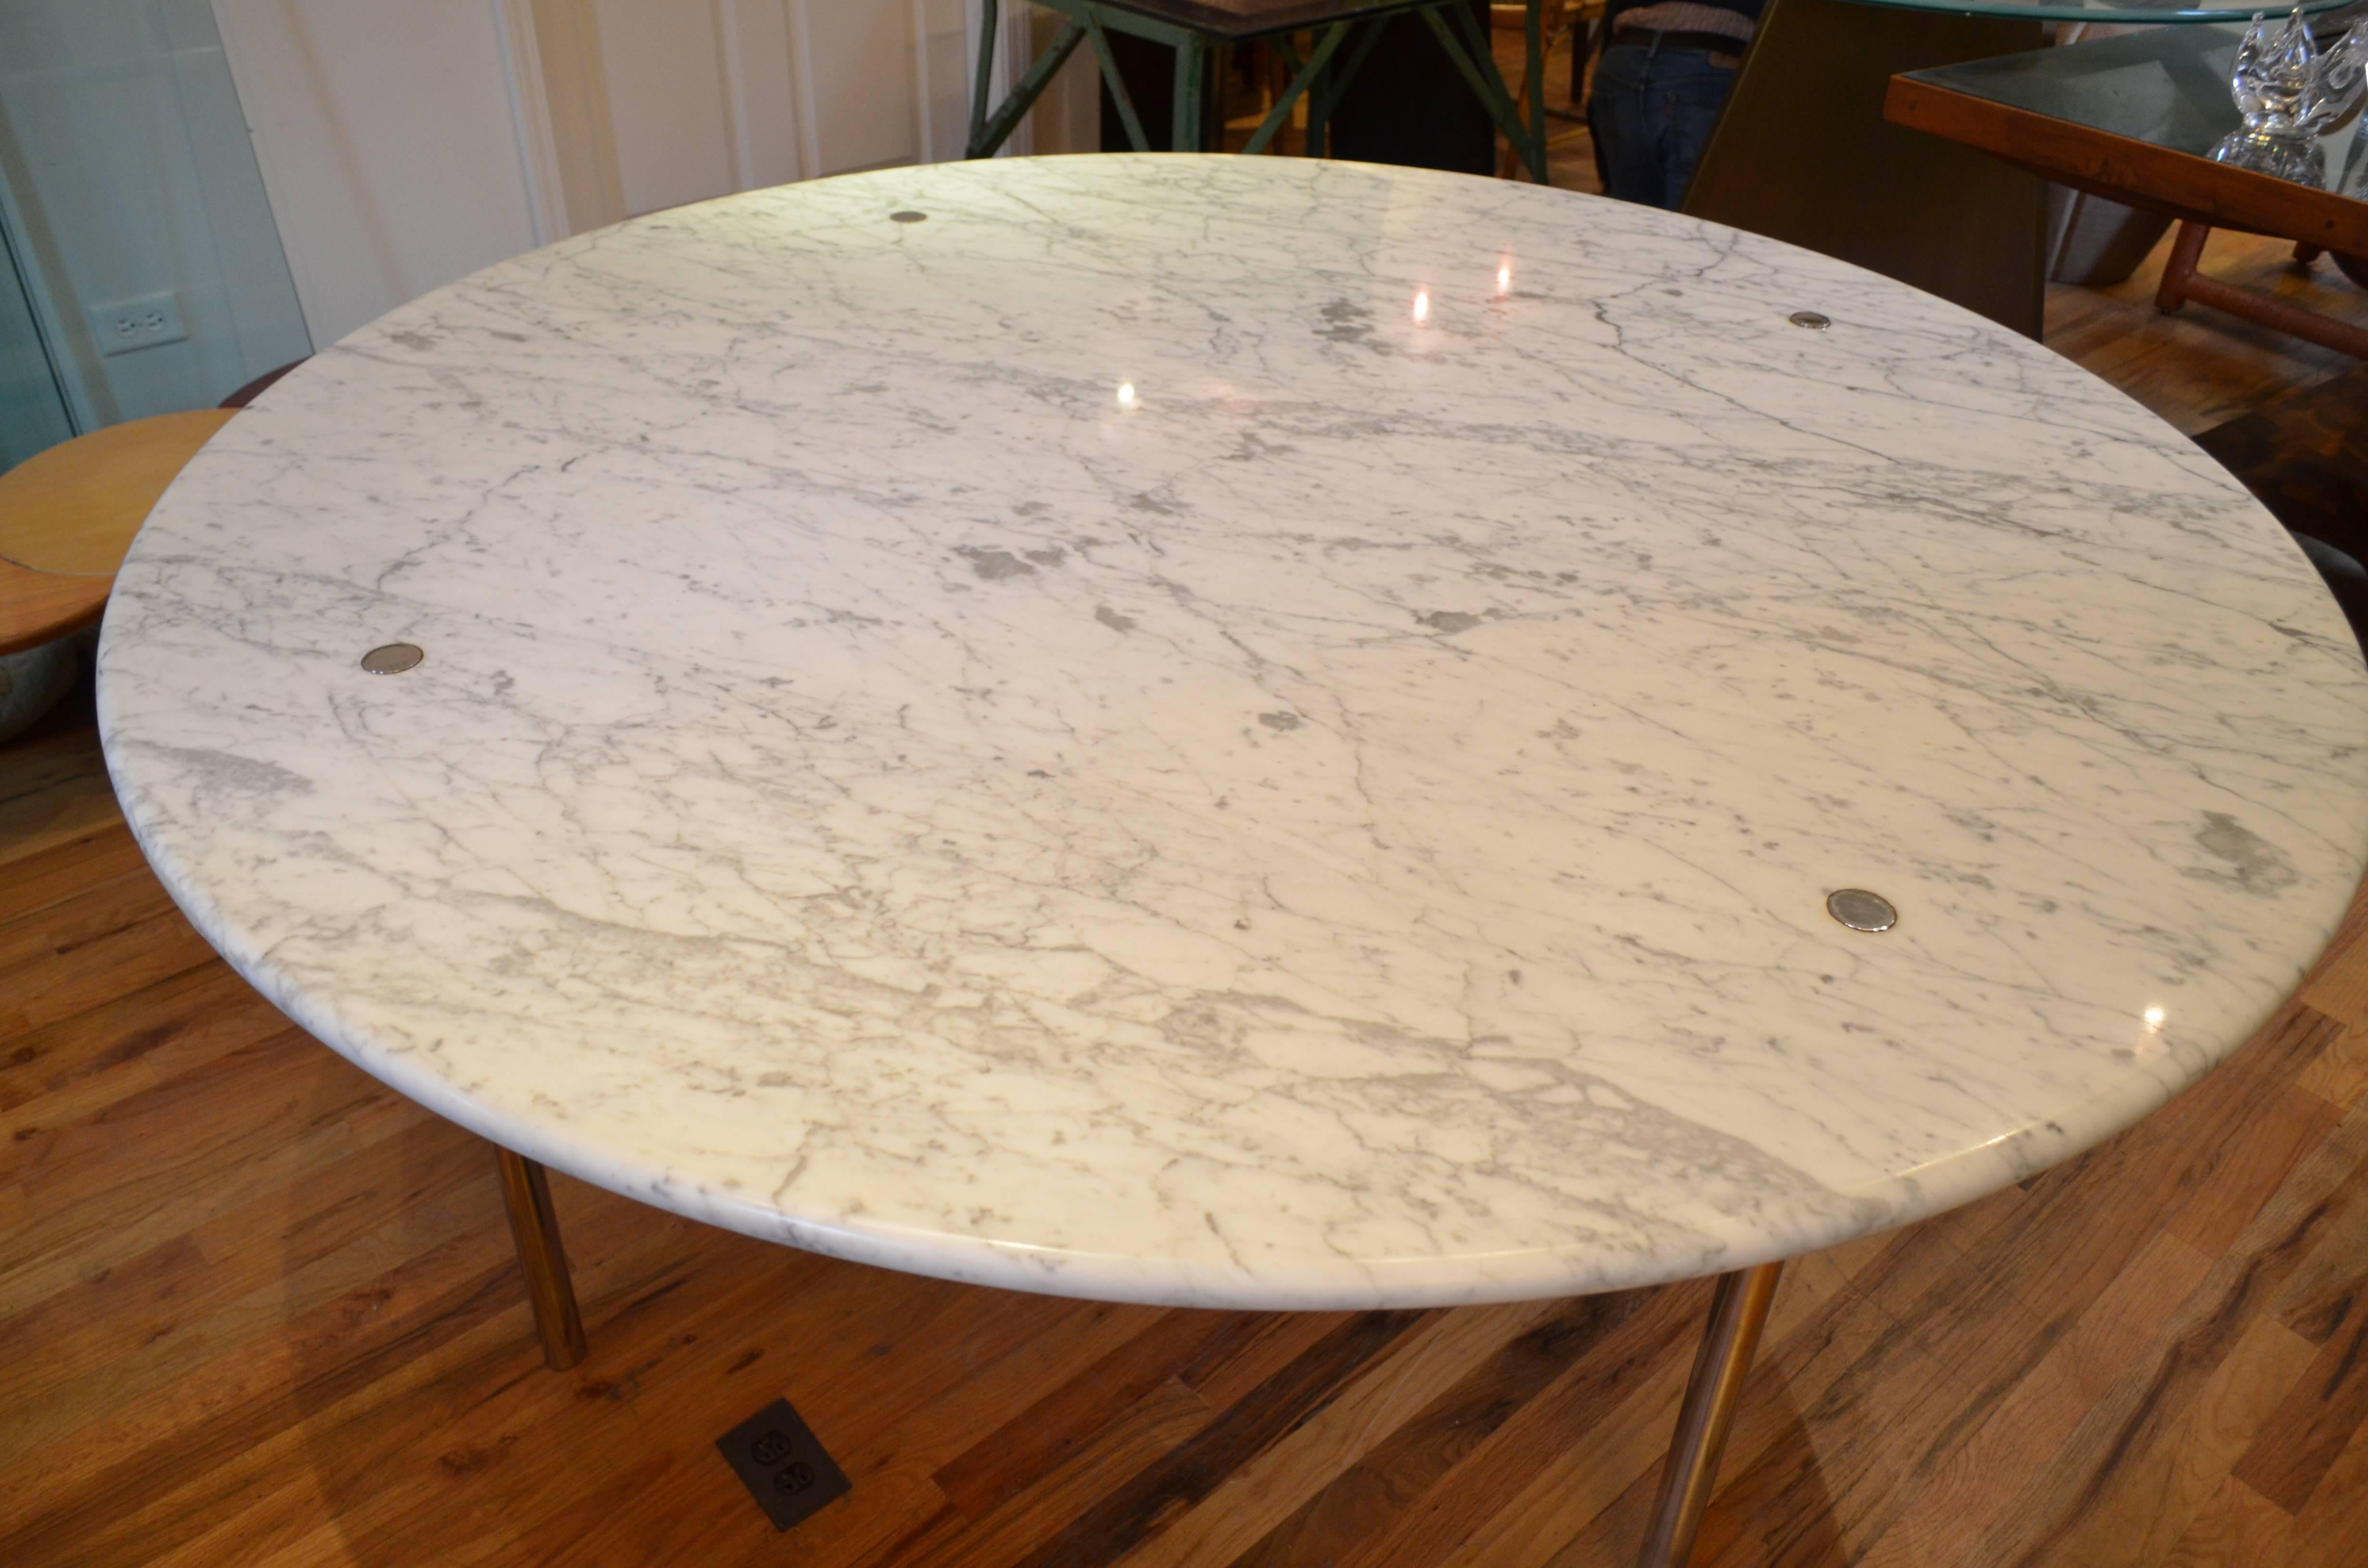 A colossal round Carrara marble dining table designed by William Katavolos, Ross Littell and Douglas Kelly for Laverne International. The table is supported on four slender chrome plated steel legs.